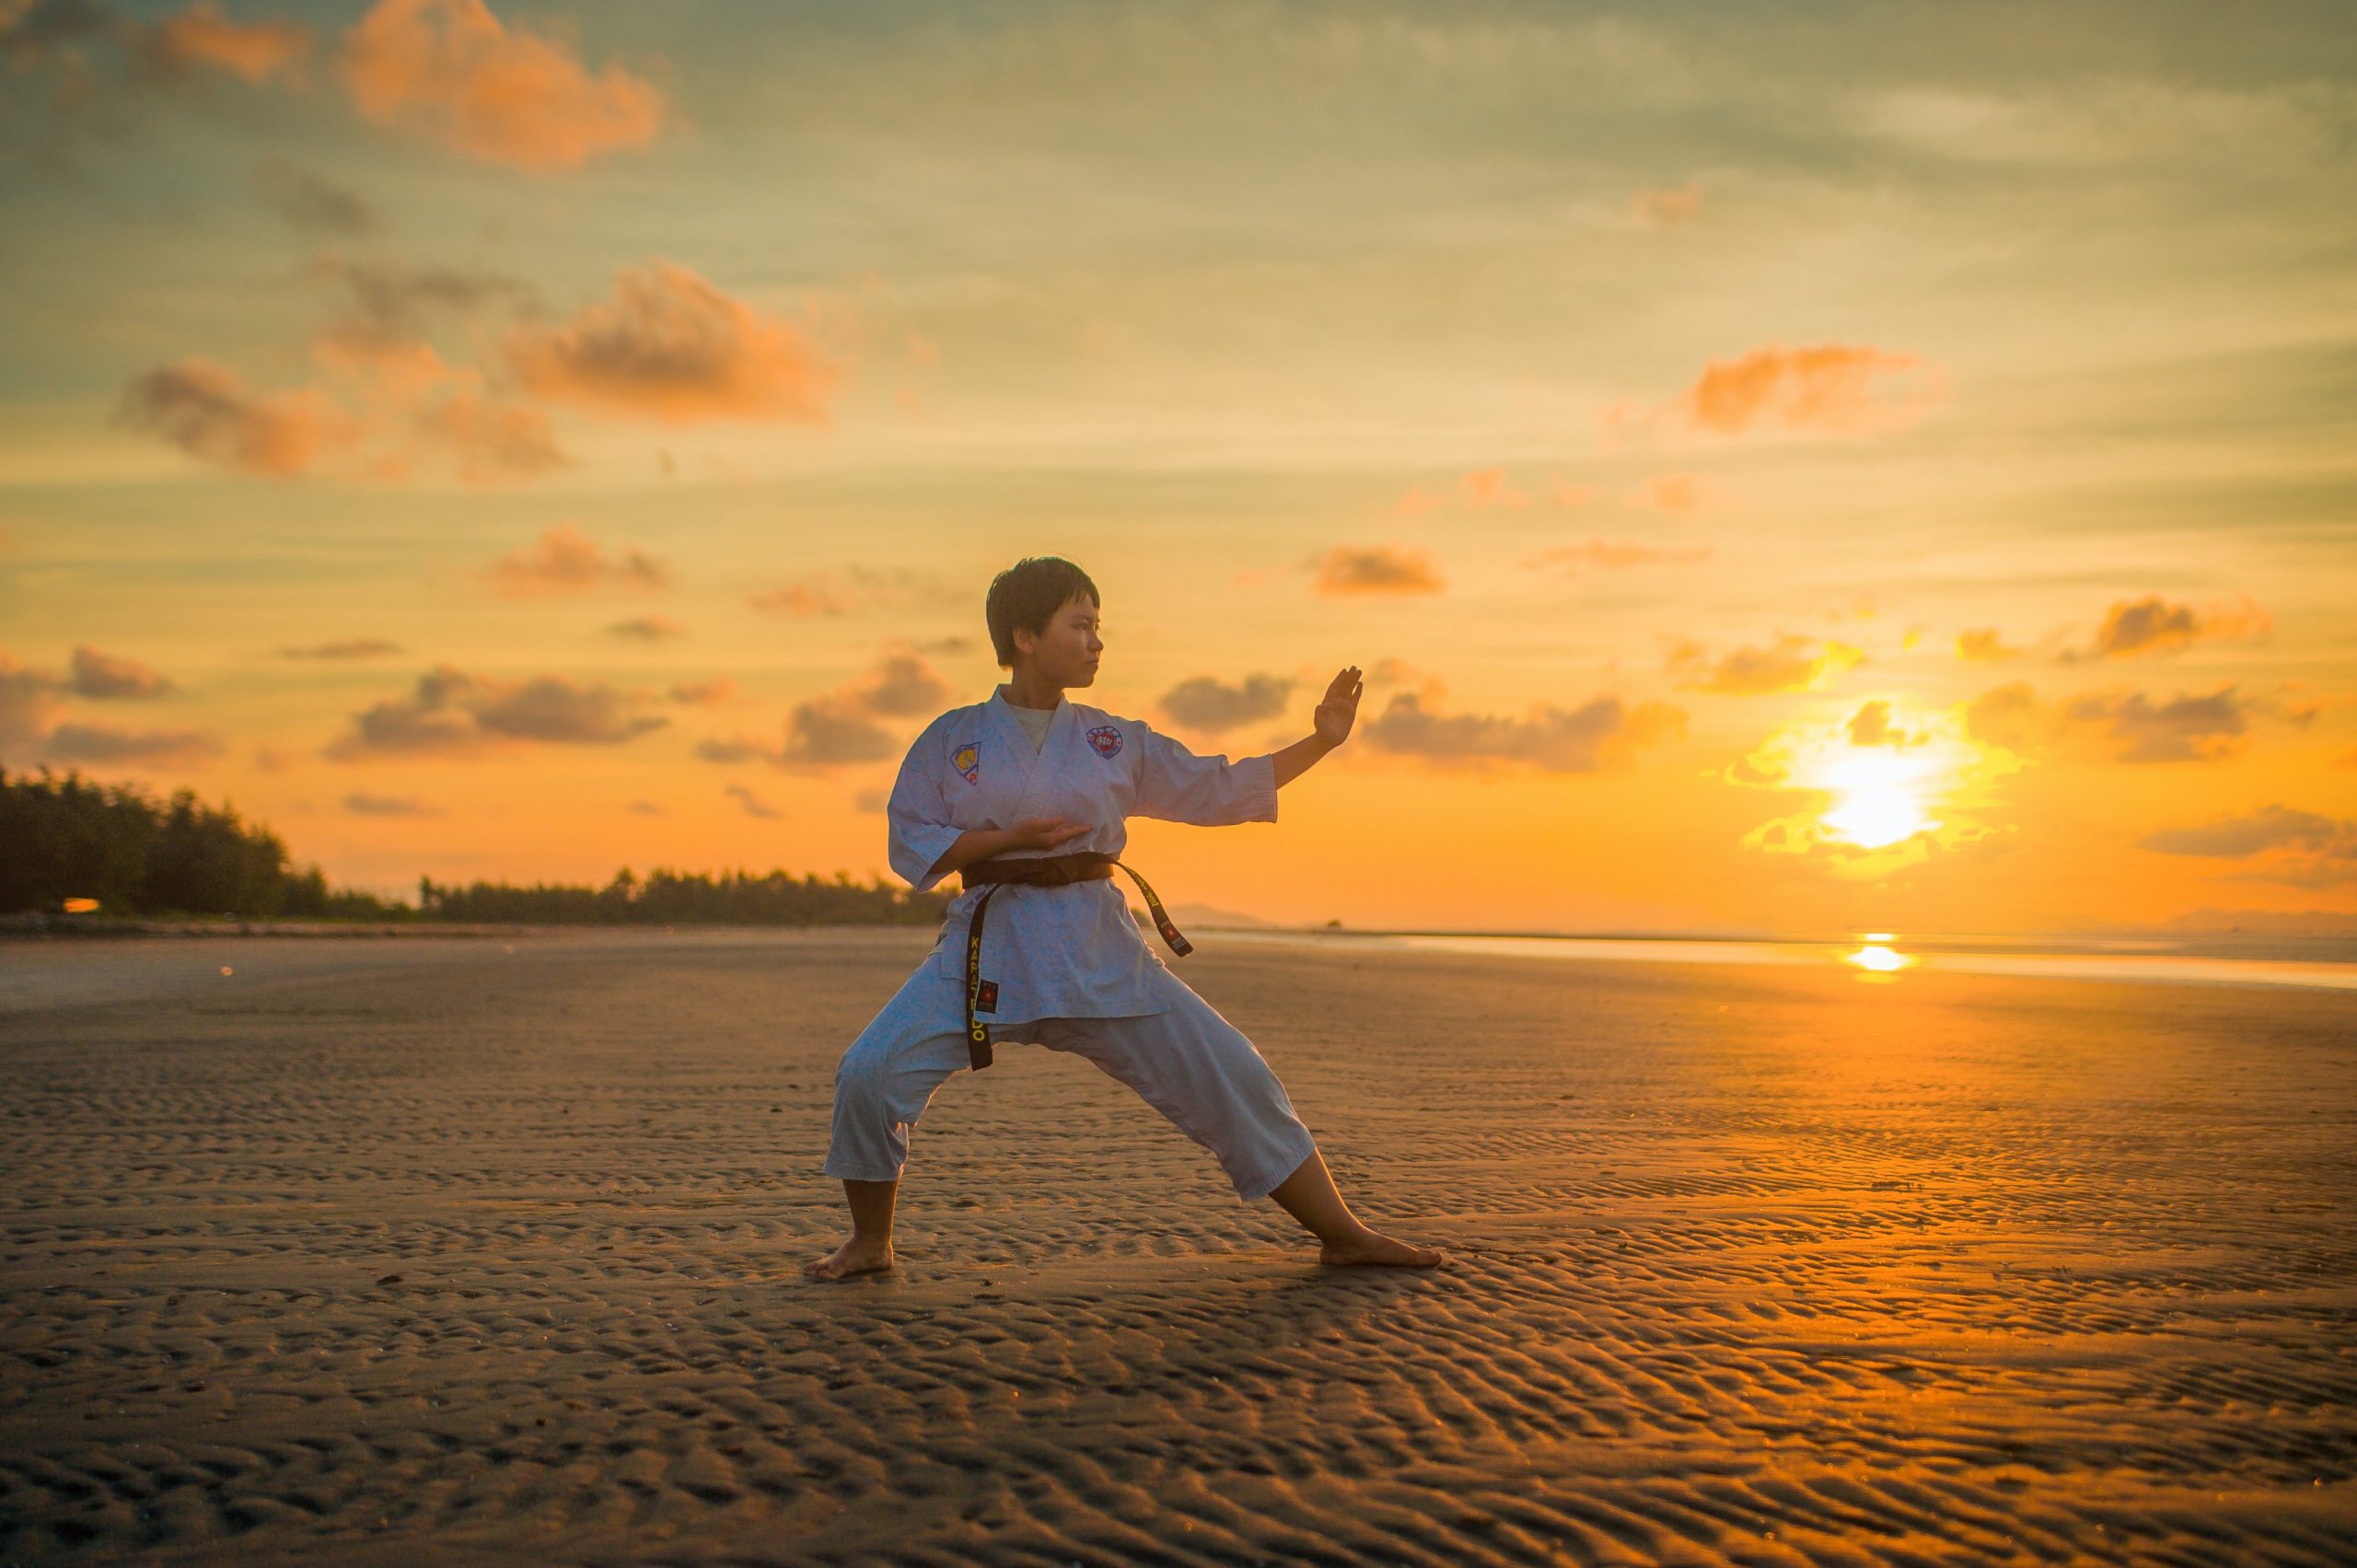 A Journey of Self-Discovery Through Martial Arts